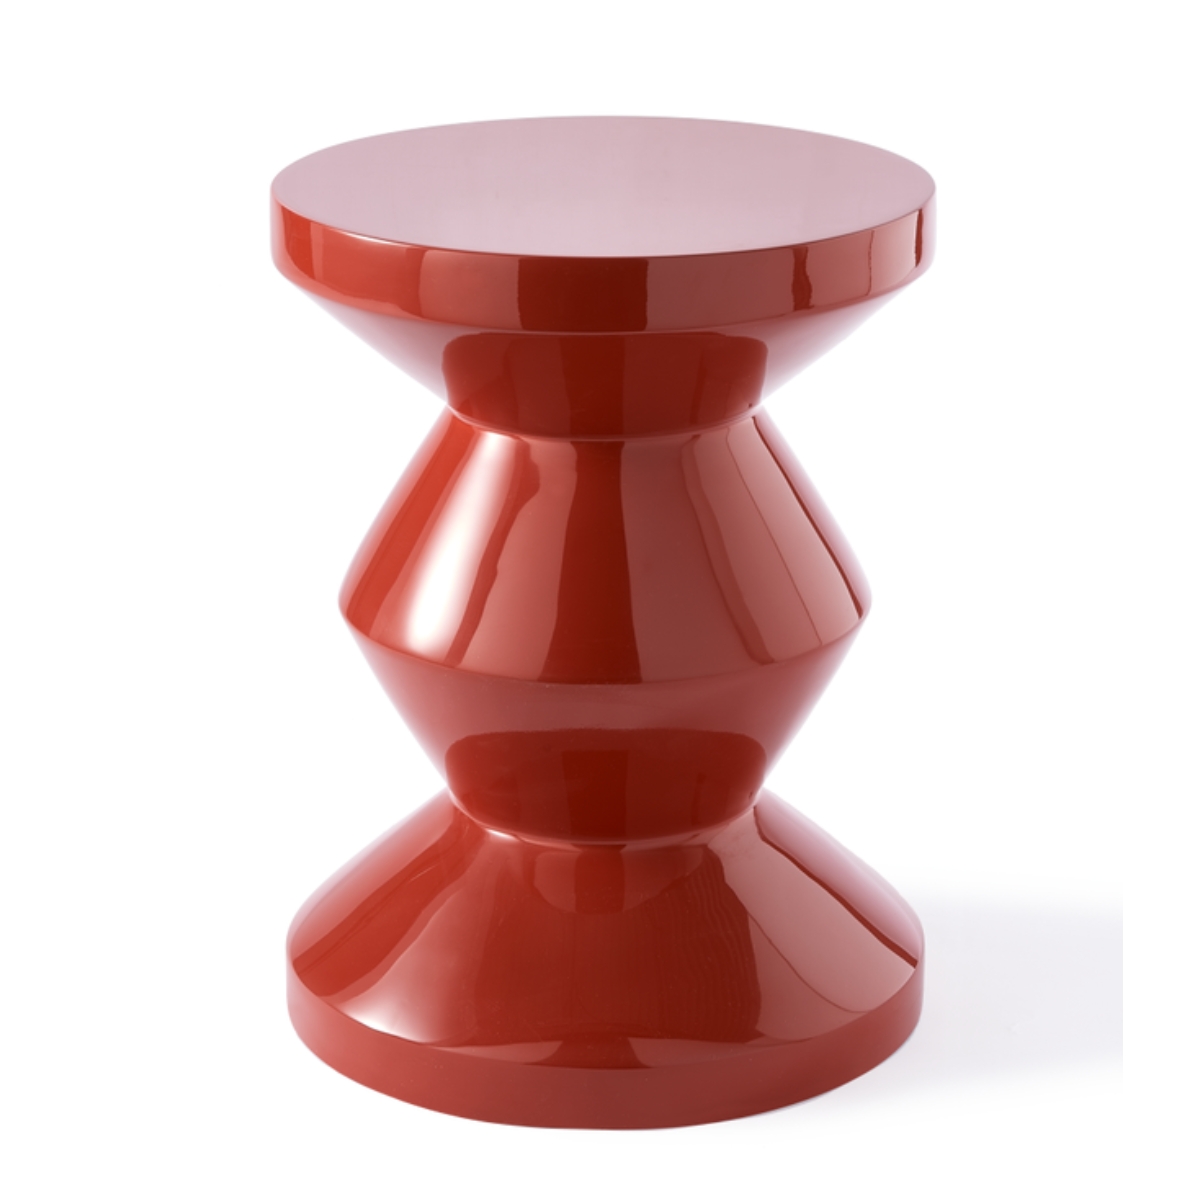 POLSPOTTEN Zig Zag Side Table - Coral Red